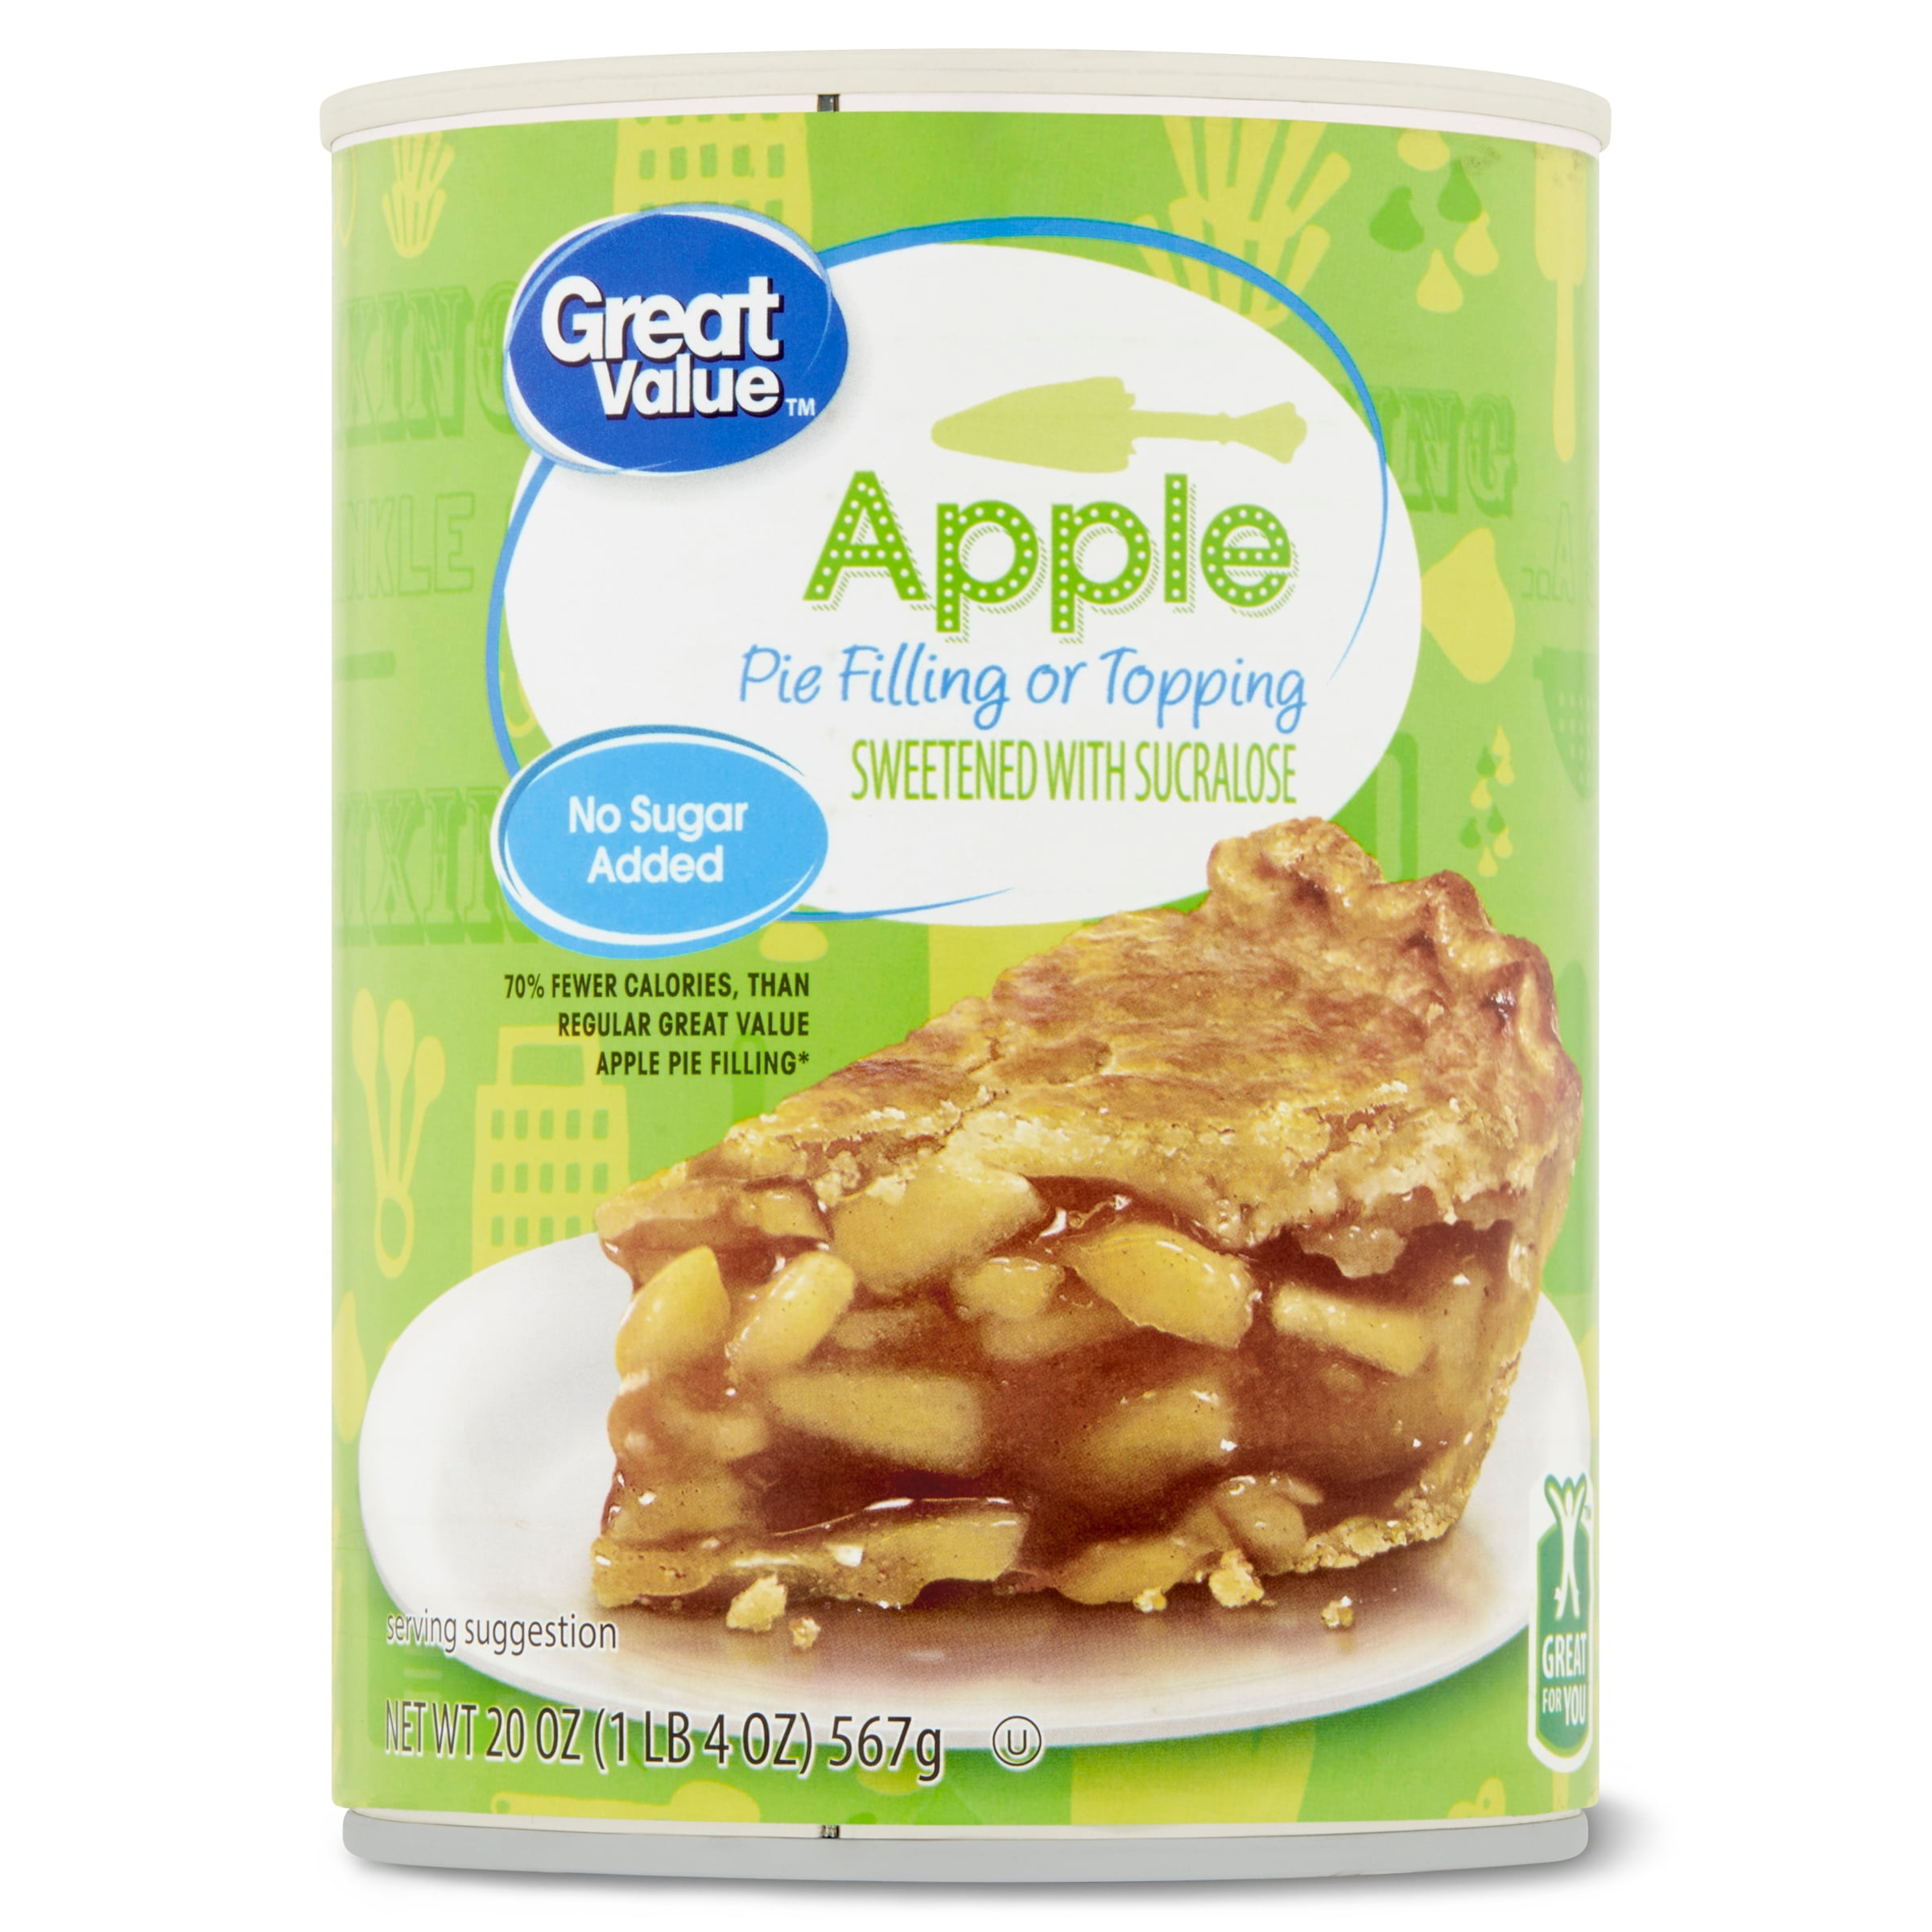 Great Value No Sugar Added Apple Pie Filling & Topping, 20 Oz